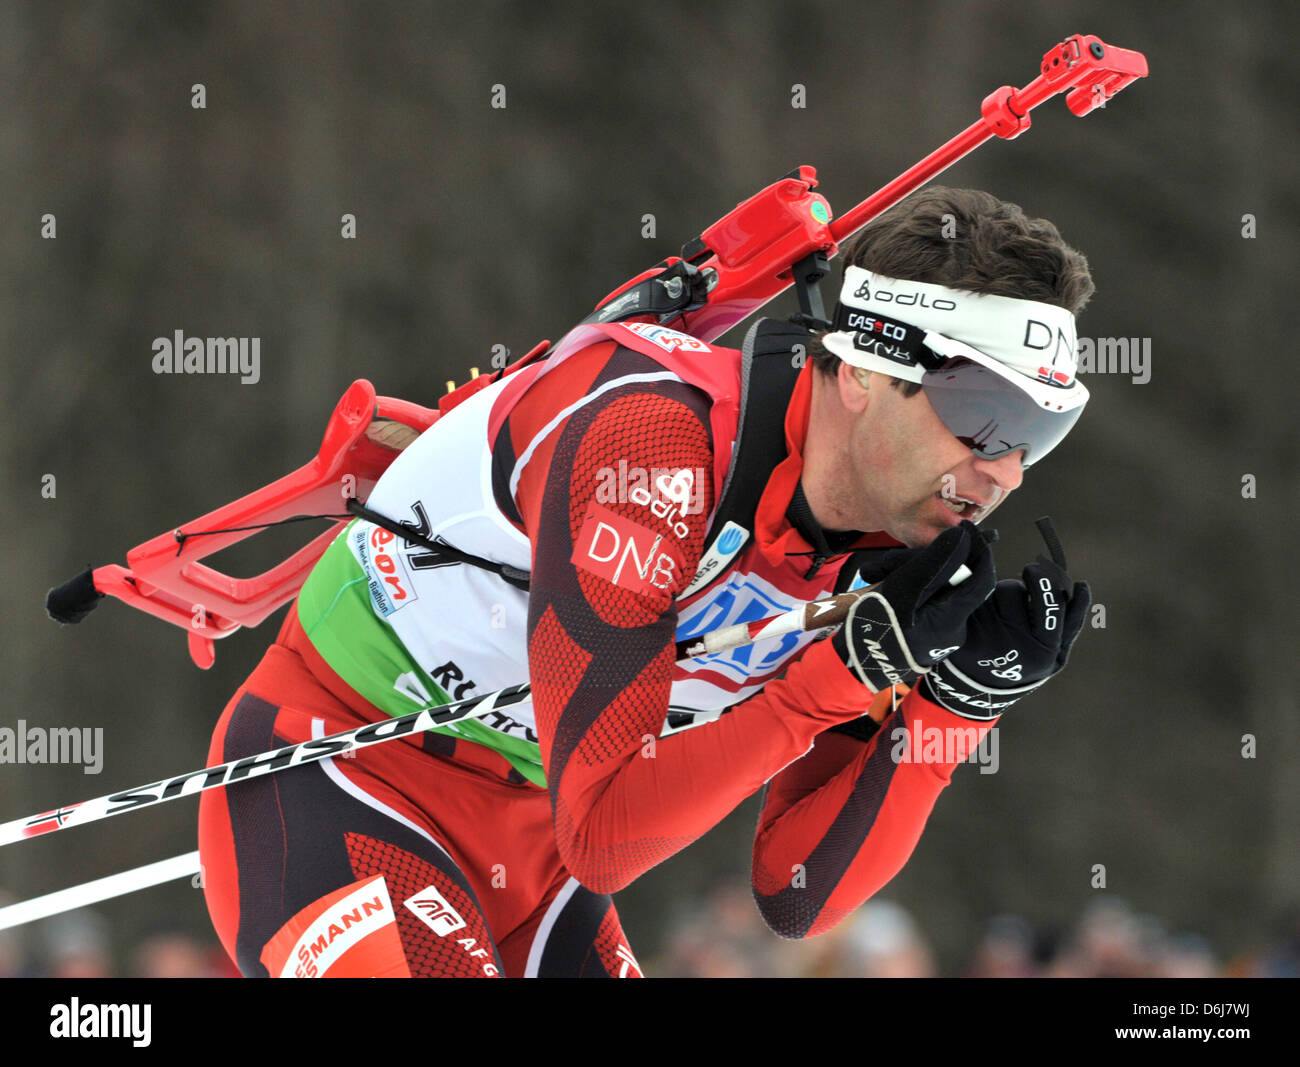 Norwegian biathlete Ole Einar Bjorndalen races during the men's single 20  km at the 2012 Biathlon World Championships at Chiemgau Arena in  Ruhpolding, Germany, 06 March 2012. Photo: Martin Schutt Stock Photo - Alamy